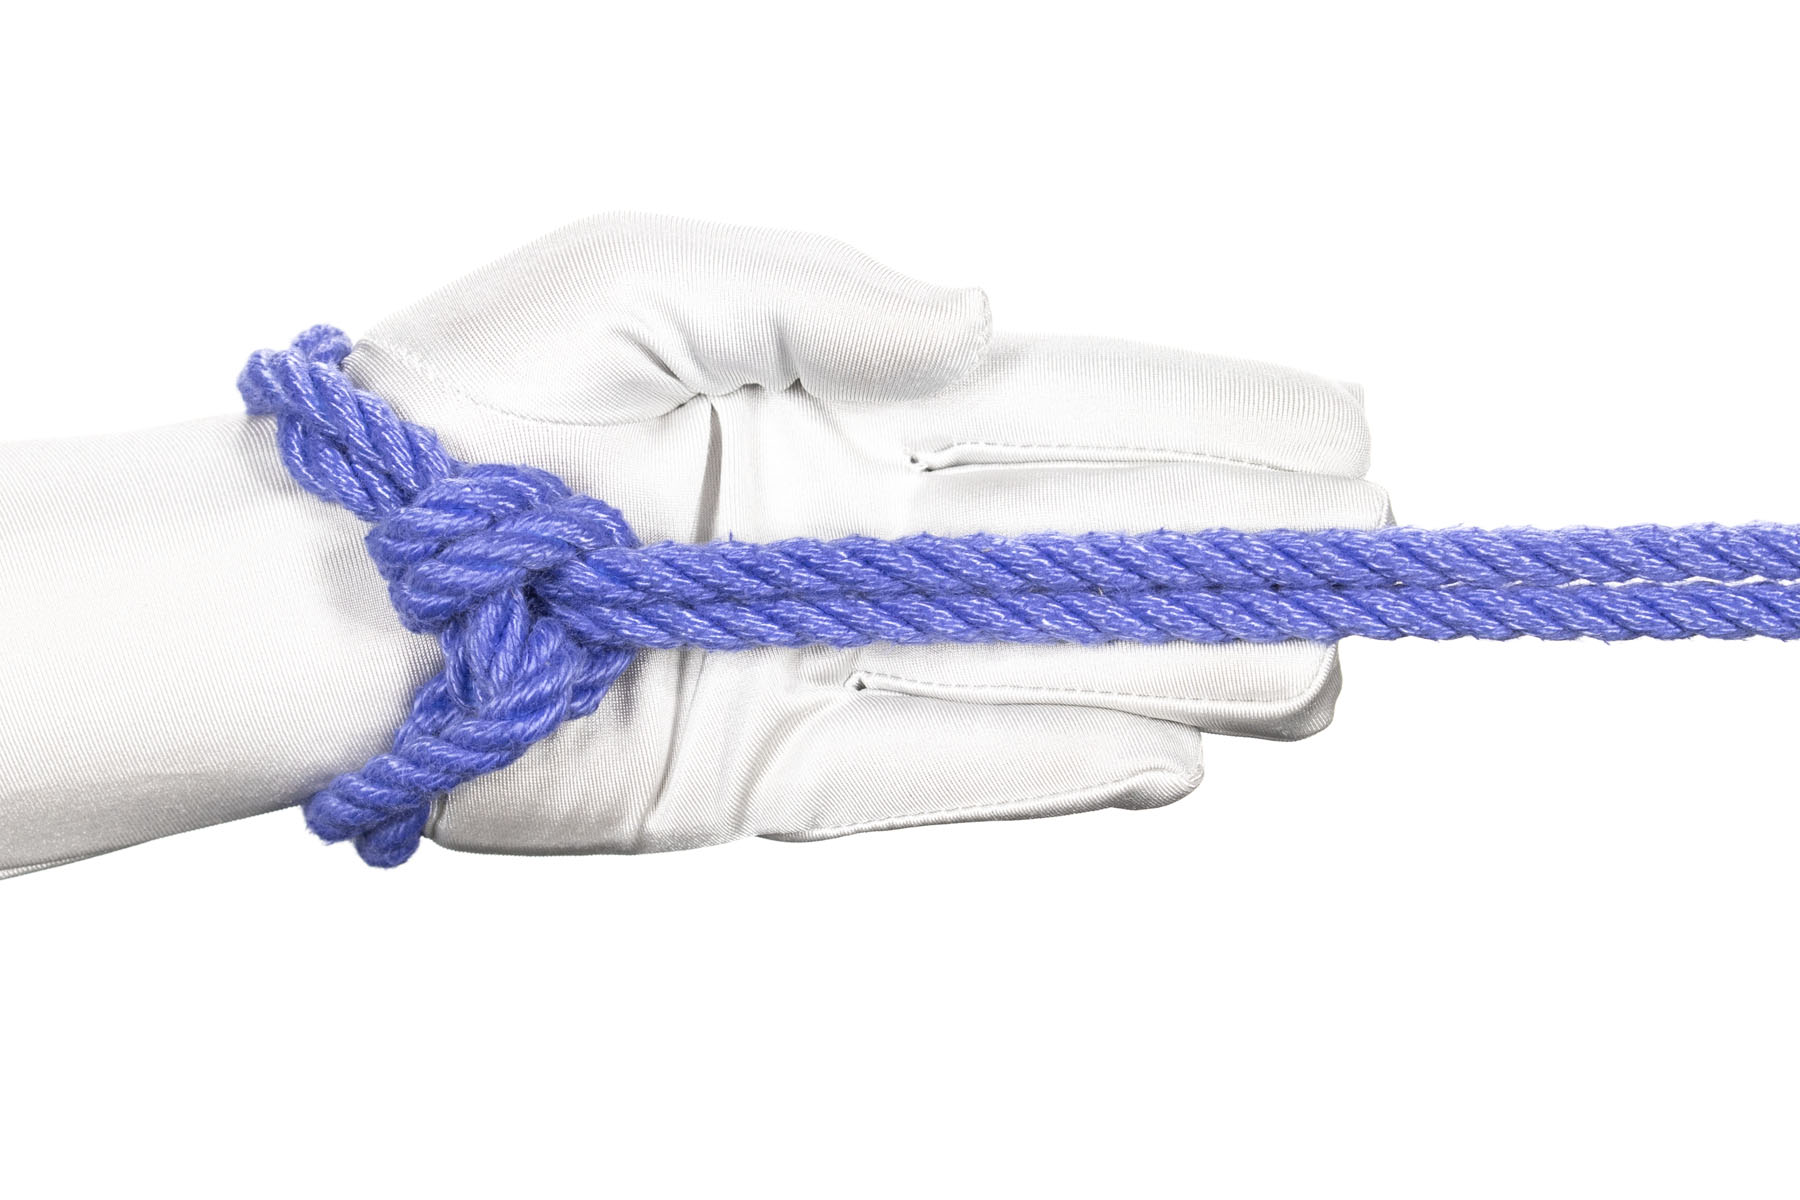 A hand pointing to the right with a single column tie with one wrap tied around it. The rope exits the half hitch facing to the left, so when the rope is pulled to the right the half hitch flips over, creating twists in the wraps that go around the wrist.